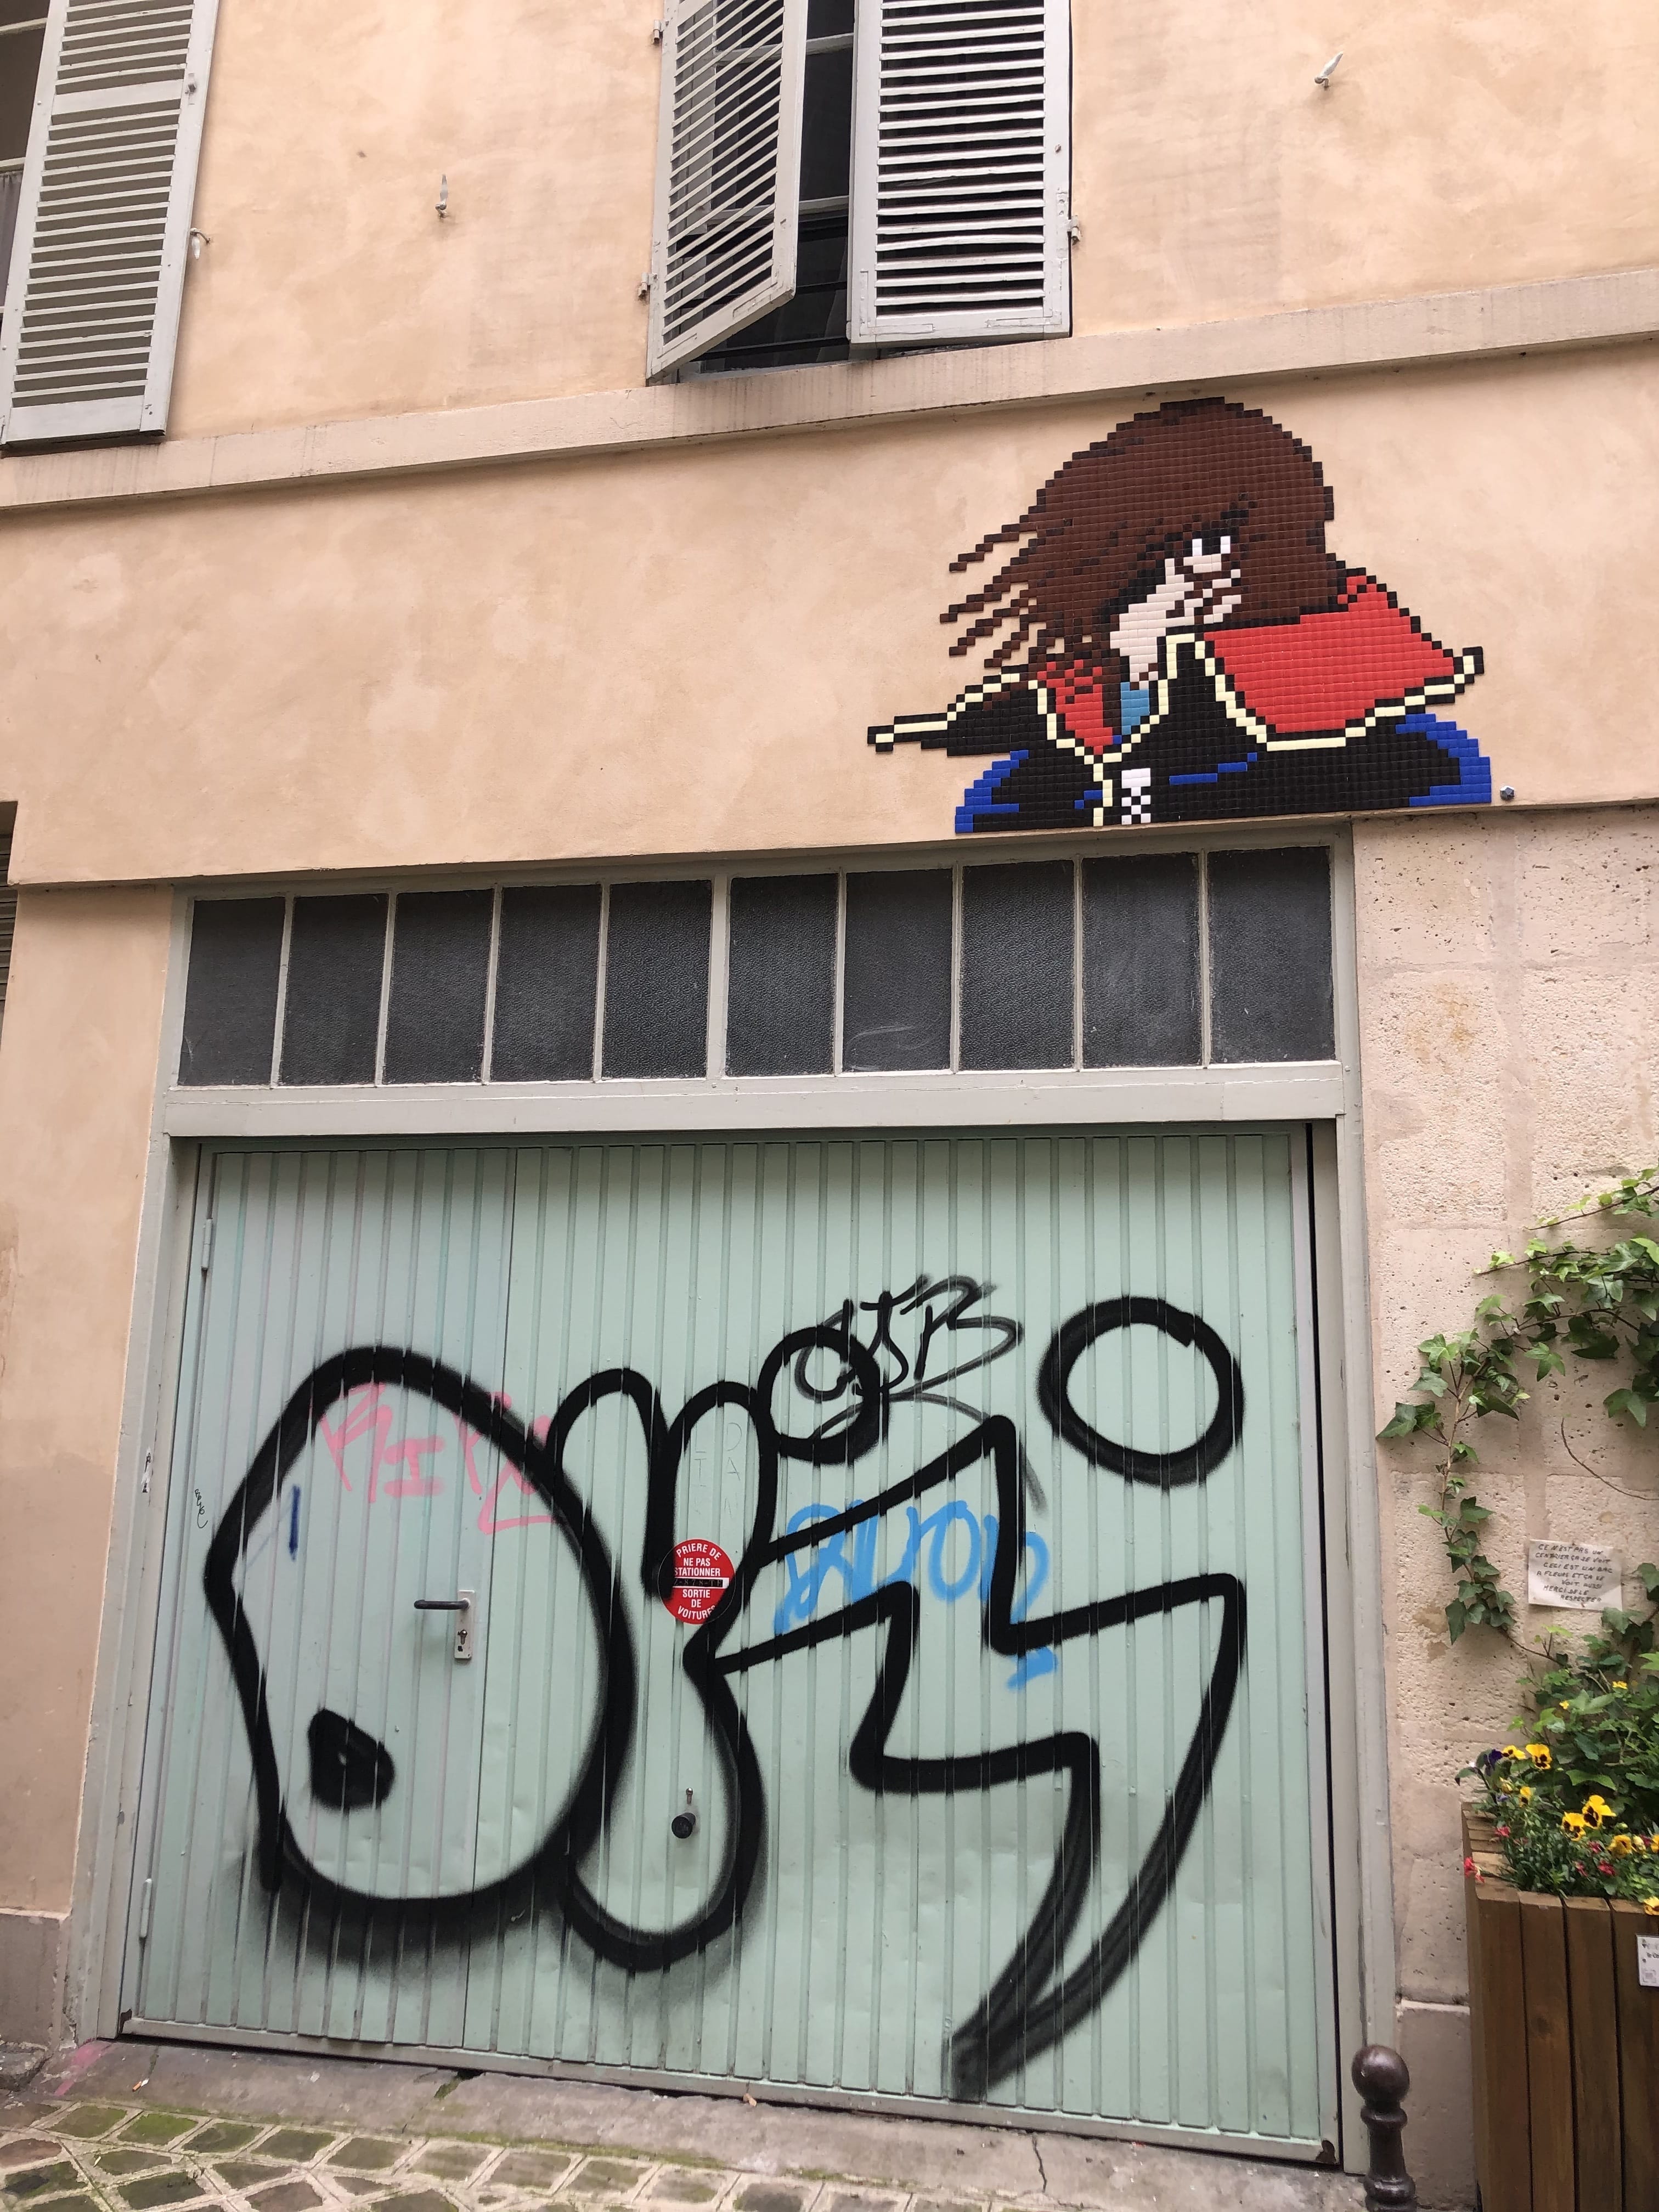 Mosaic 5139 Albator by the artist Invader captured by Artparis in Paris France